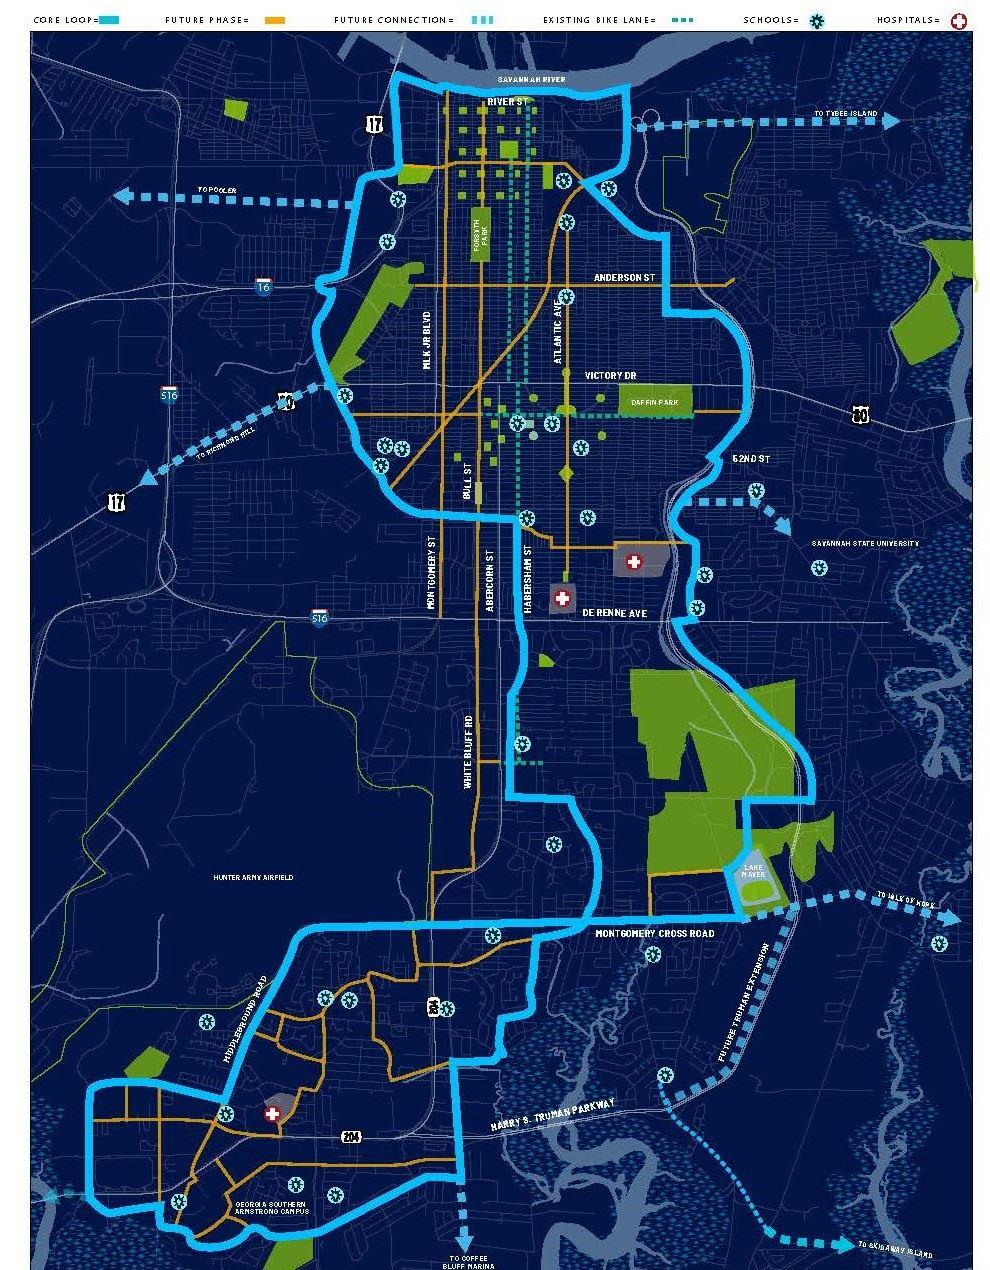 The map shows the eventual route for Tide to Town, planned to connect 75% of Savannah’s neighborhoods.